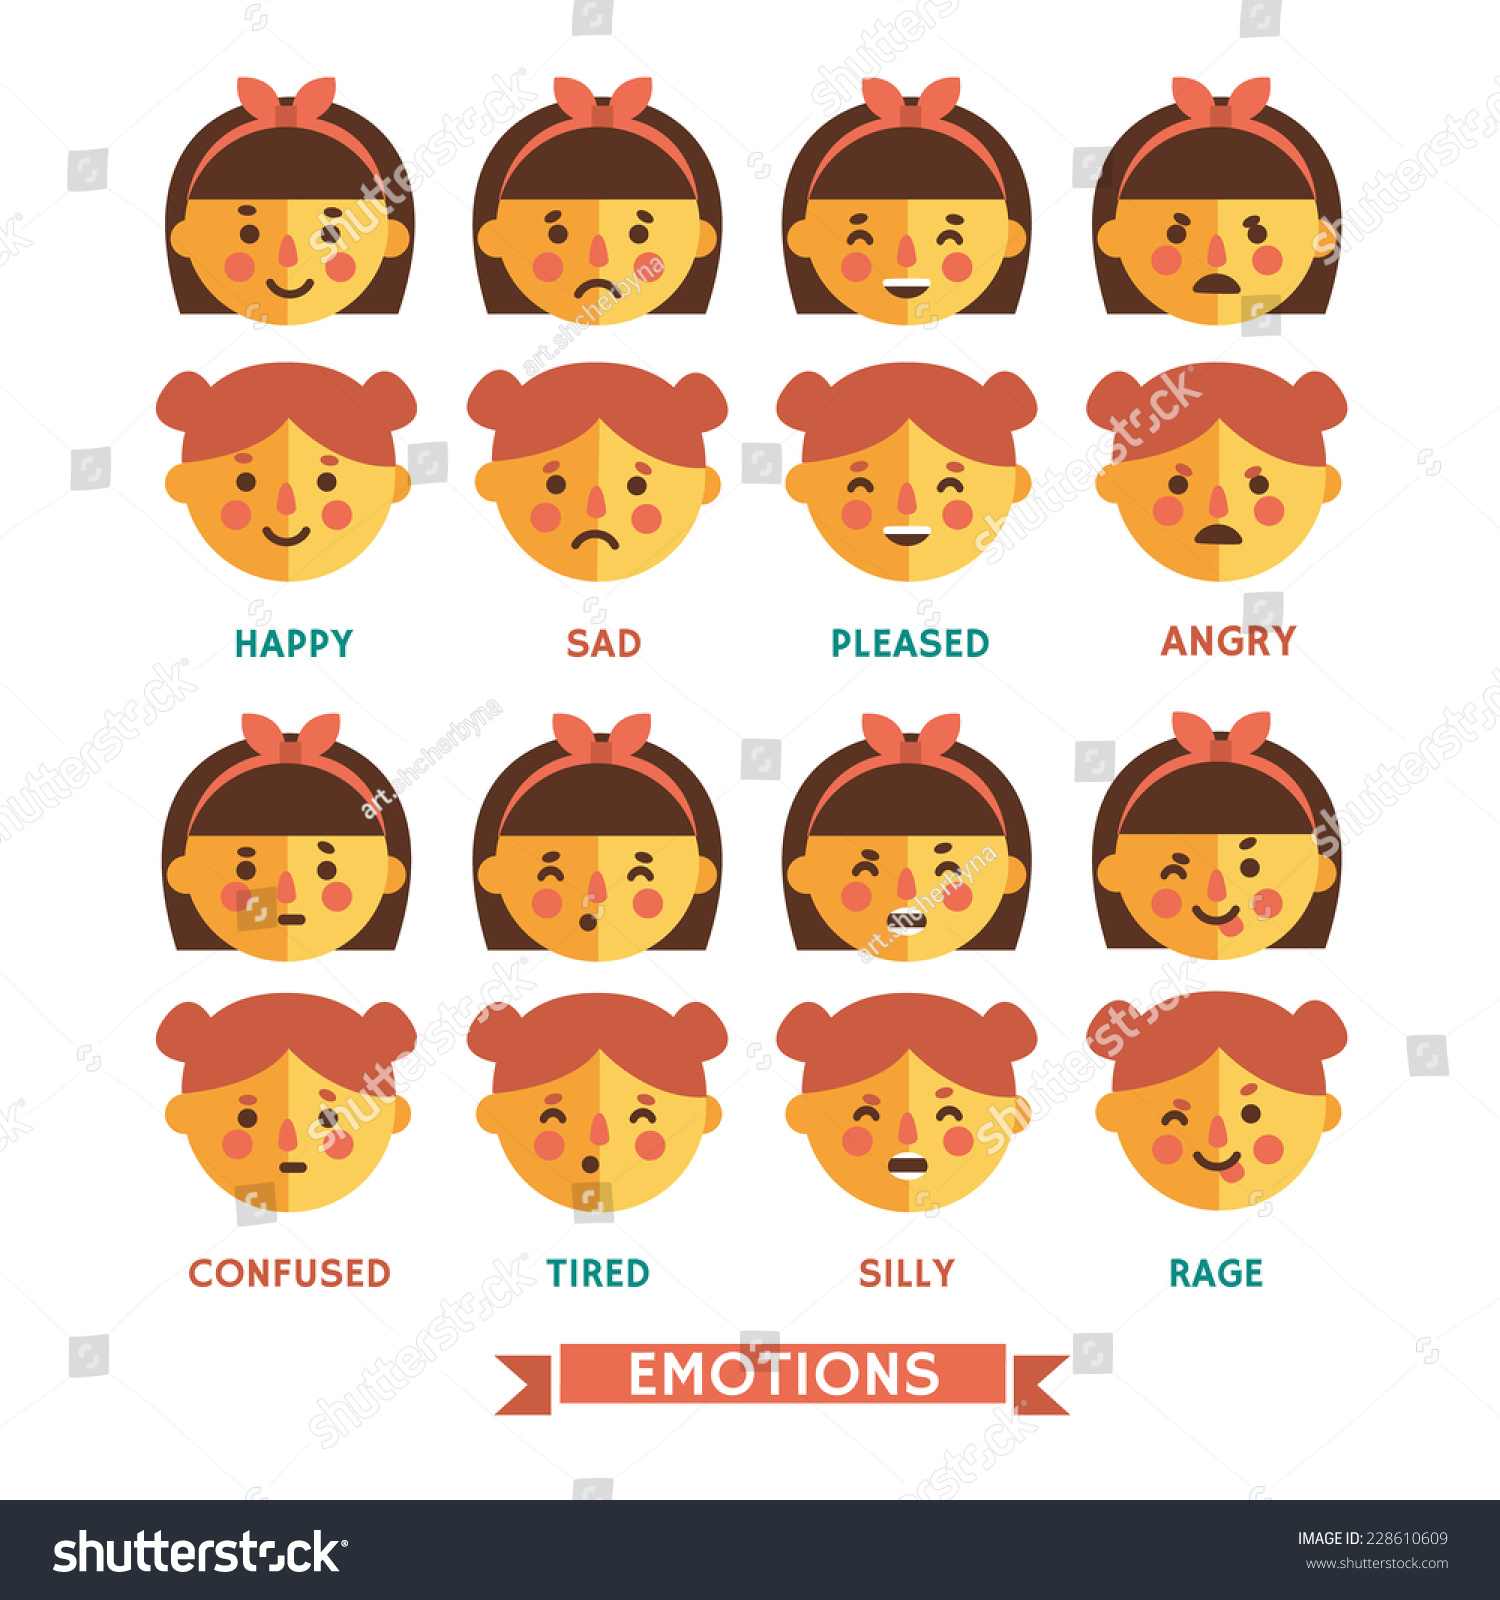 Set Of Vector Emotions Of Character In Flat Style. Happy, Sad, Pleased ...